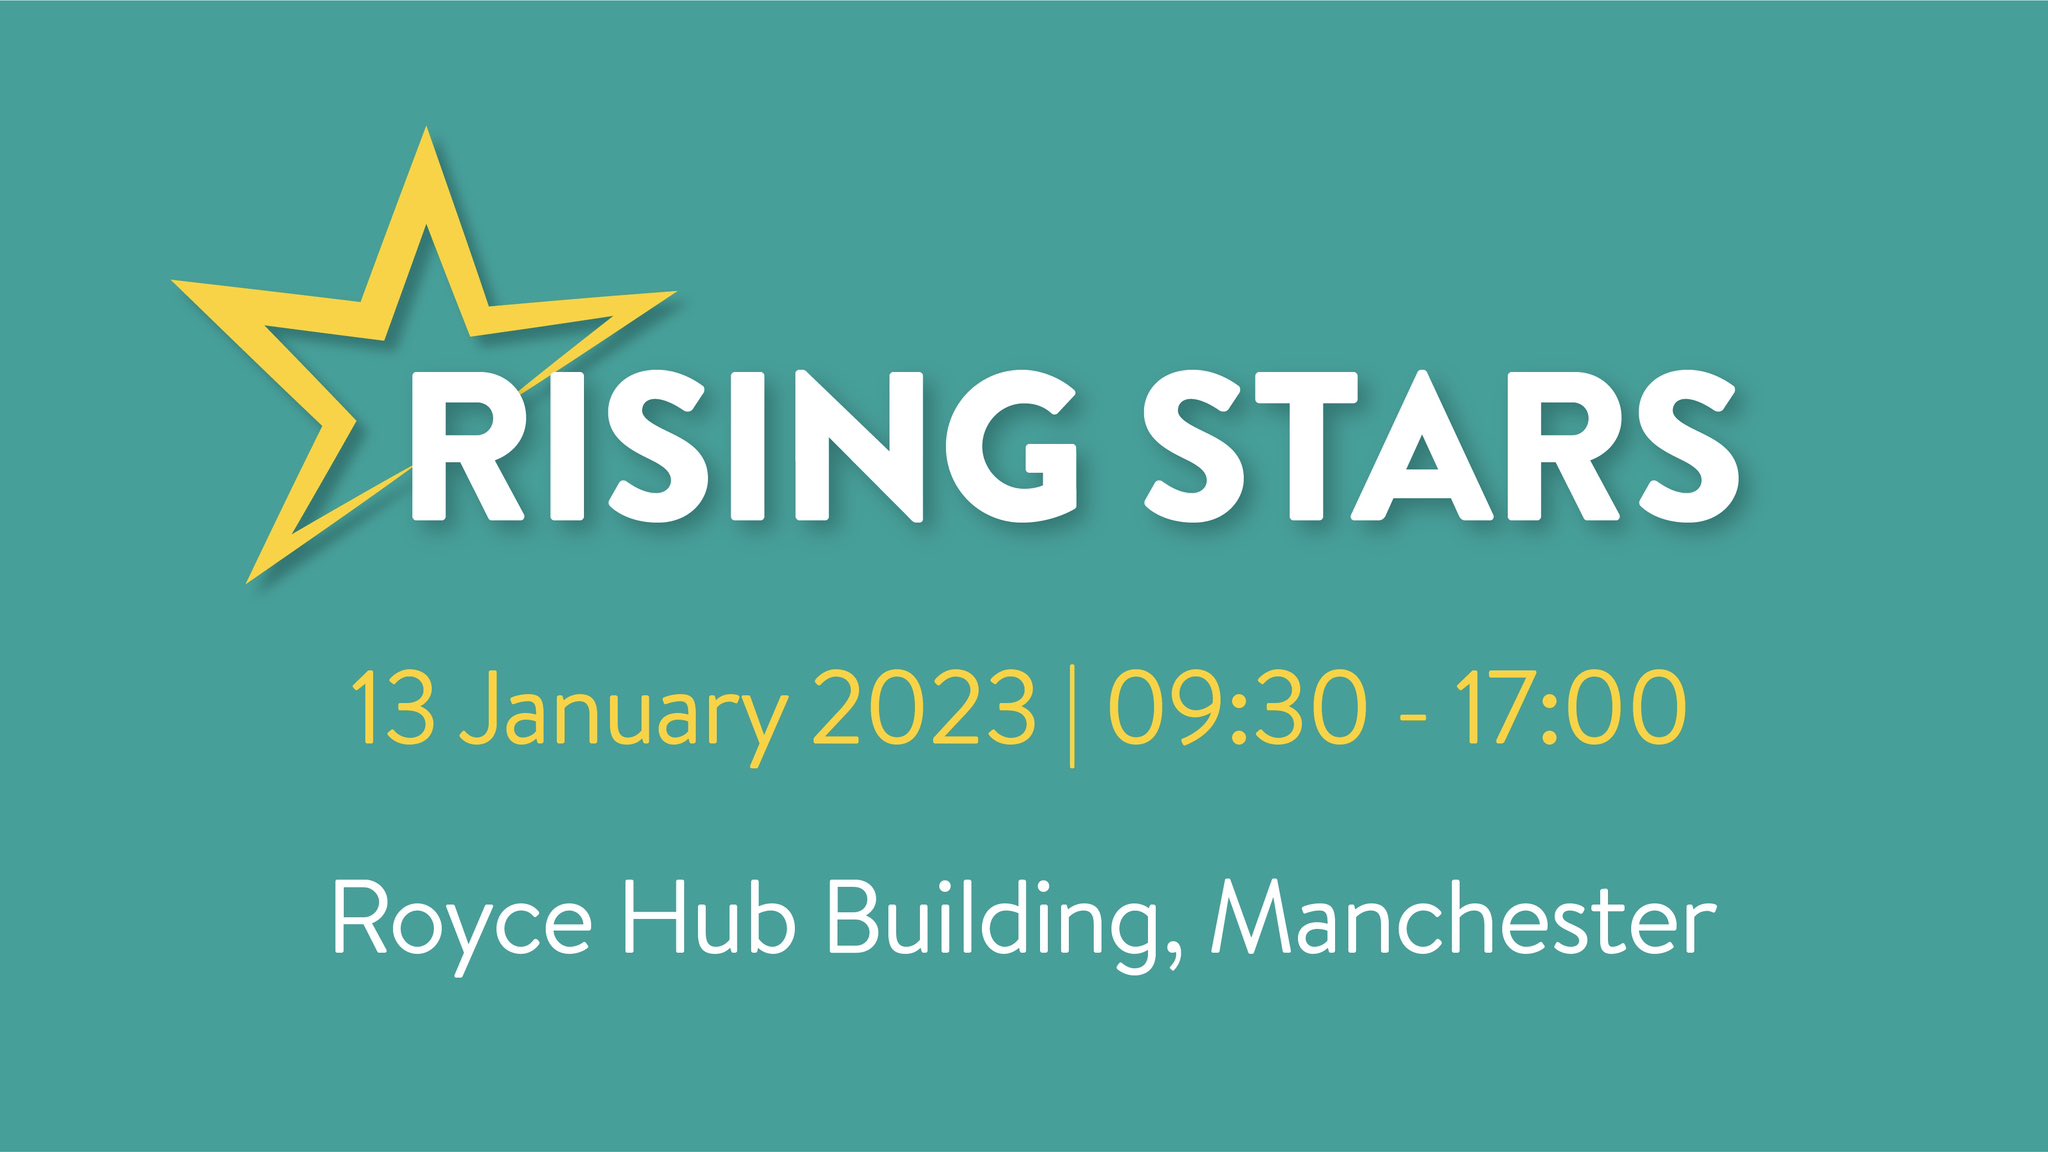 a graphic of the rising stars event in january 2023, ft a star and text saying rising stars royce hub building manchester